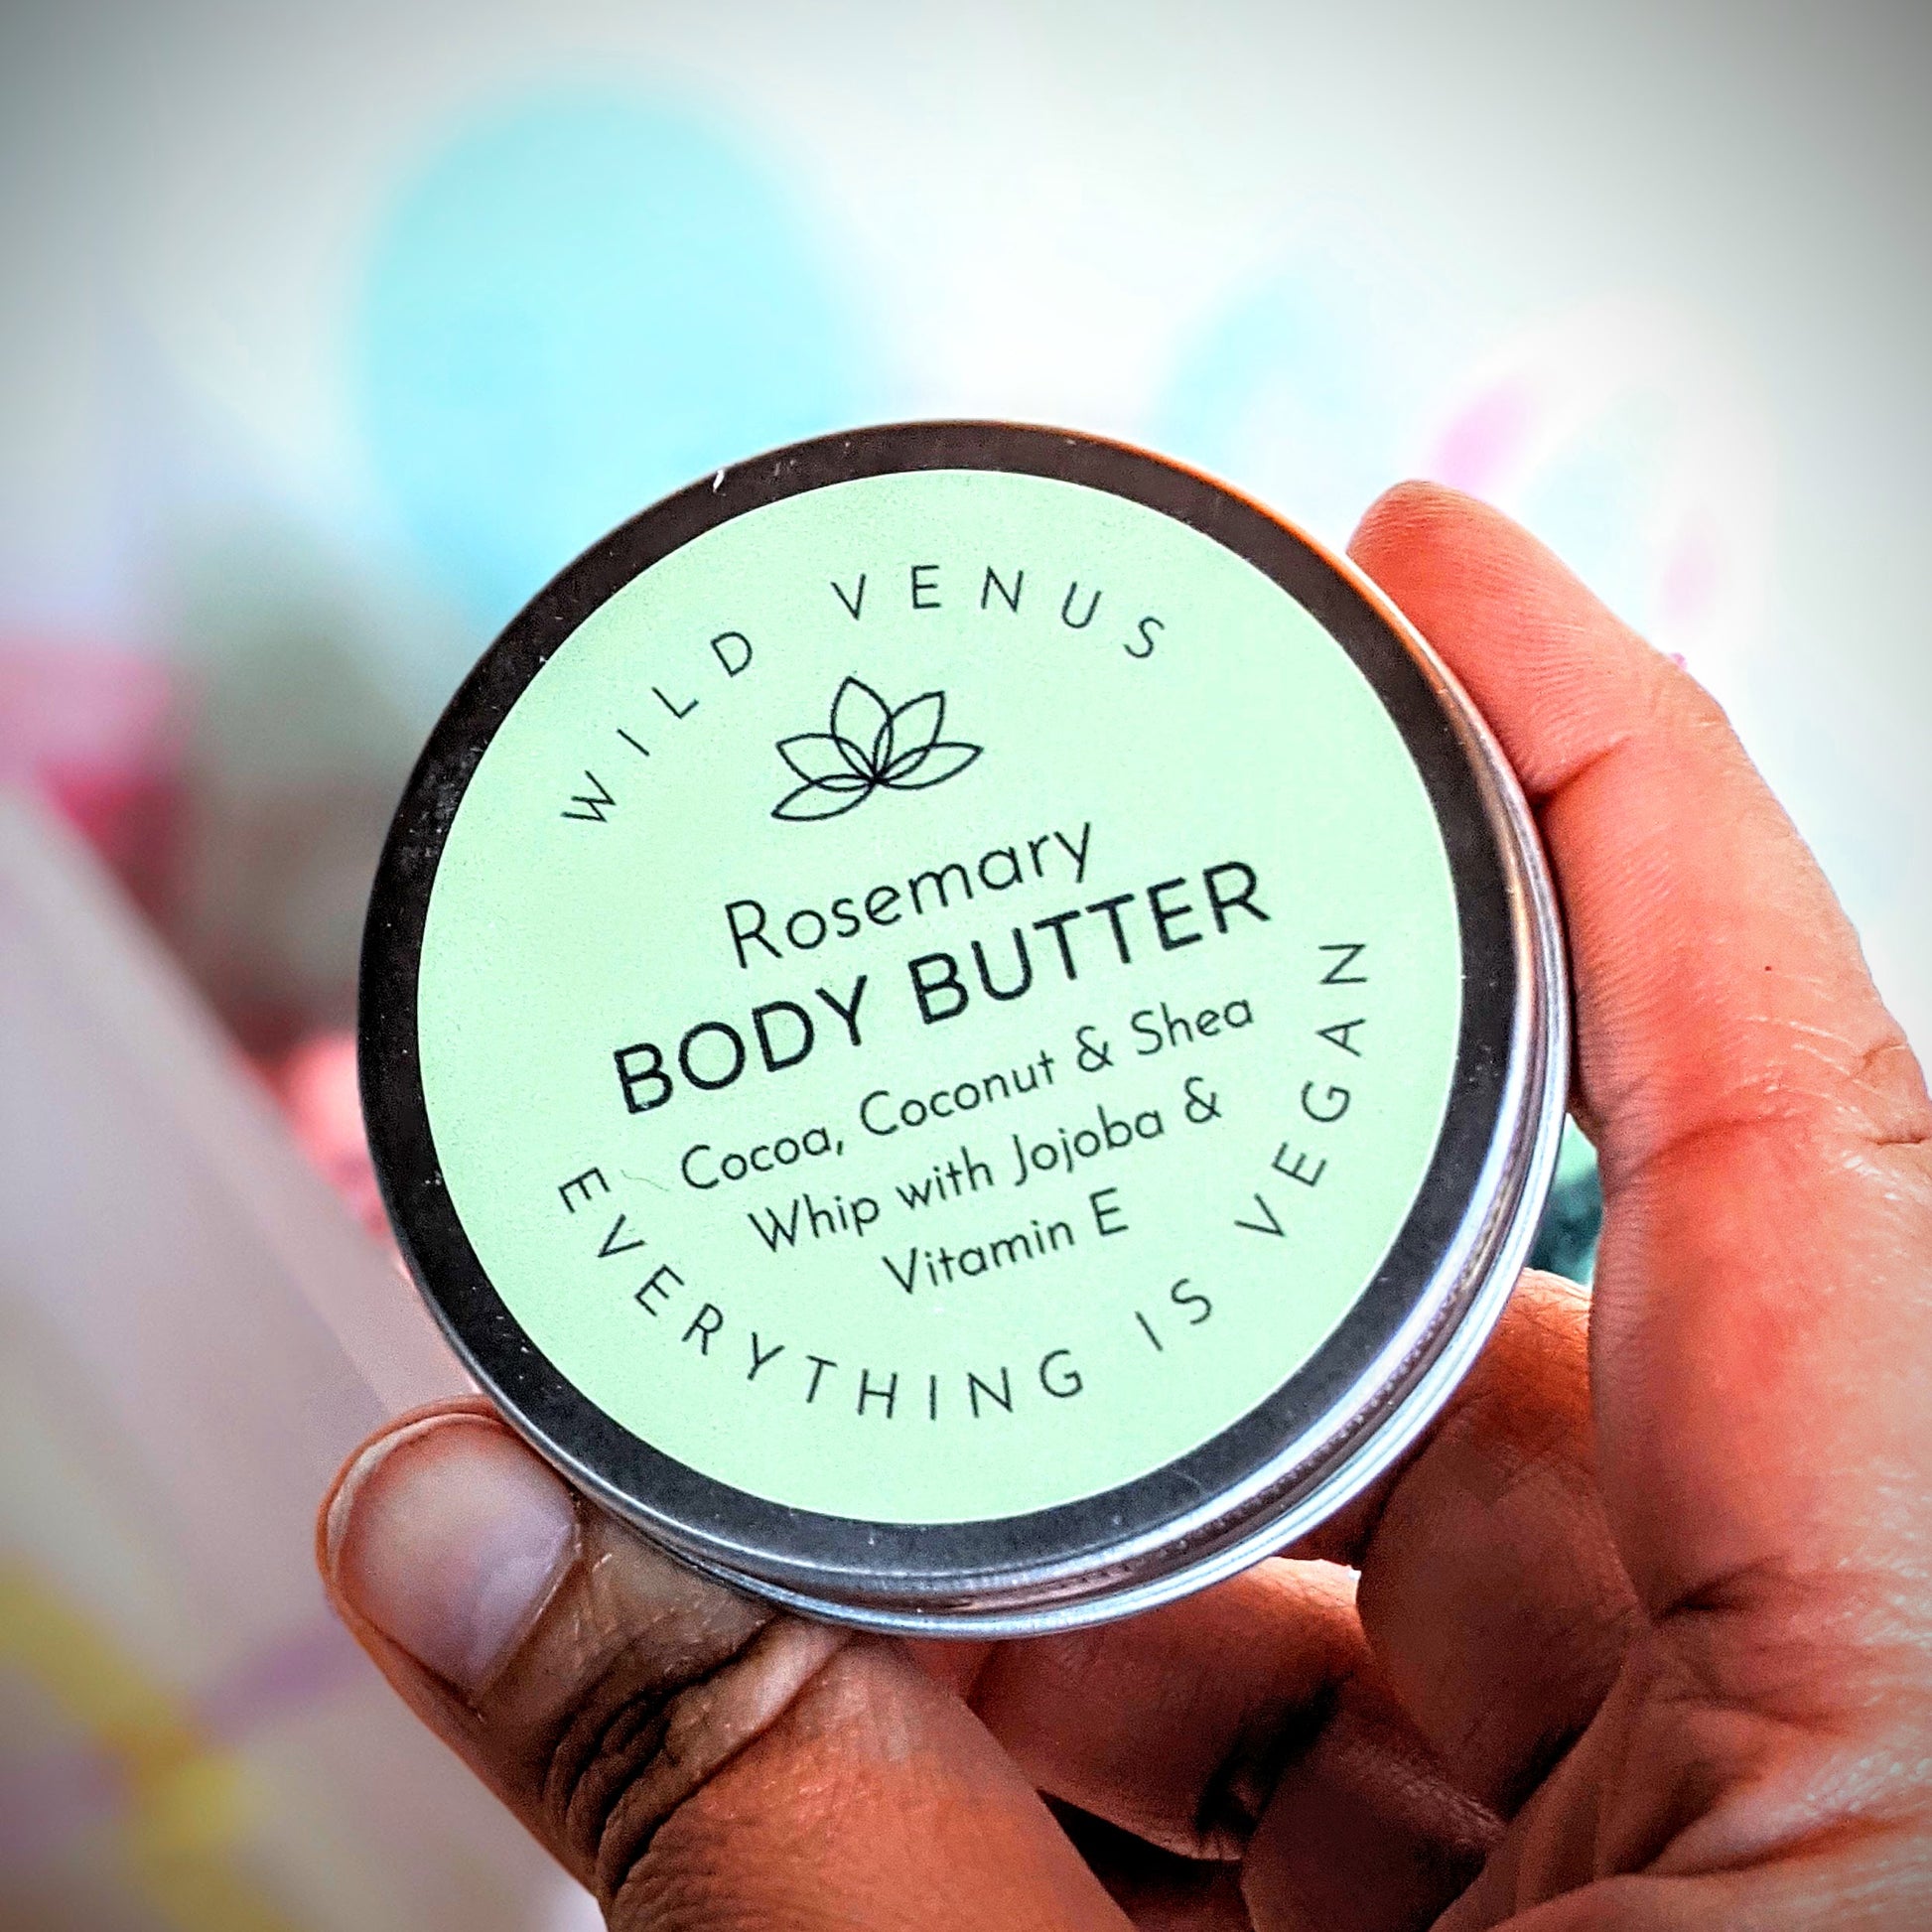 Naomi is holding a tin of the rosemary body butter. 